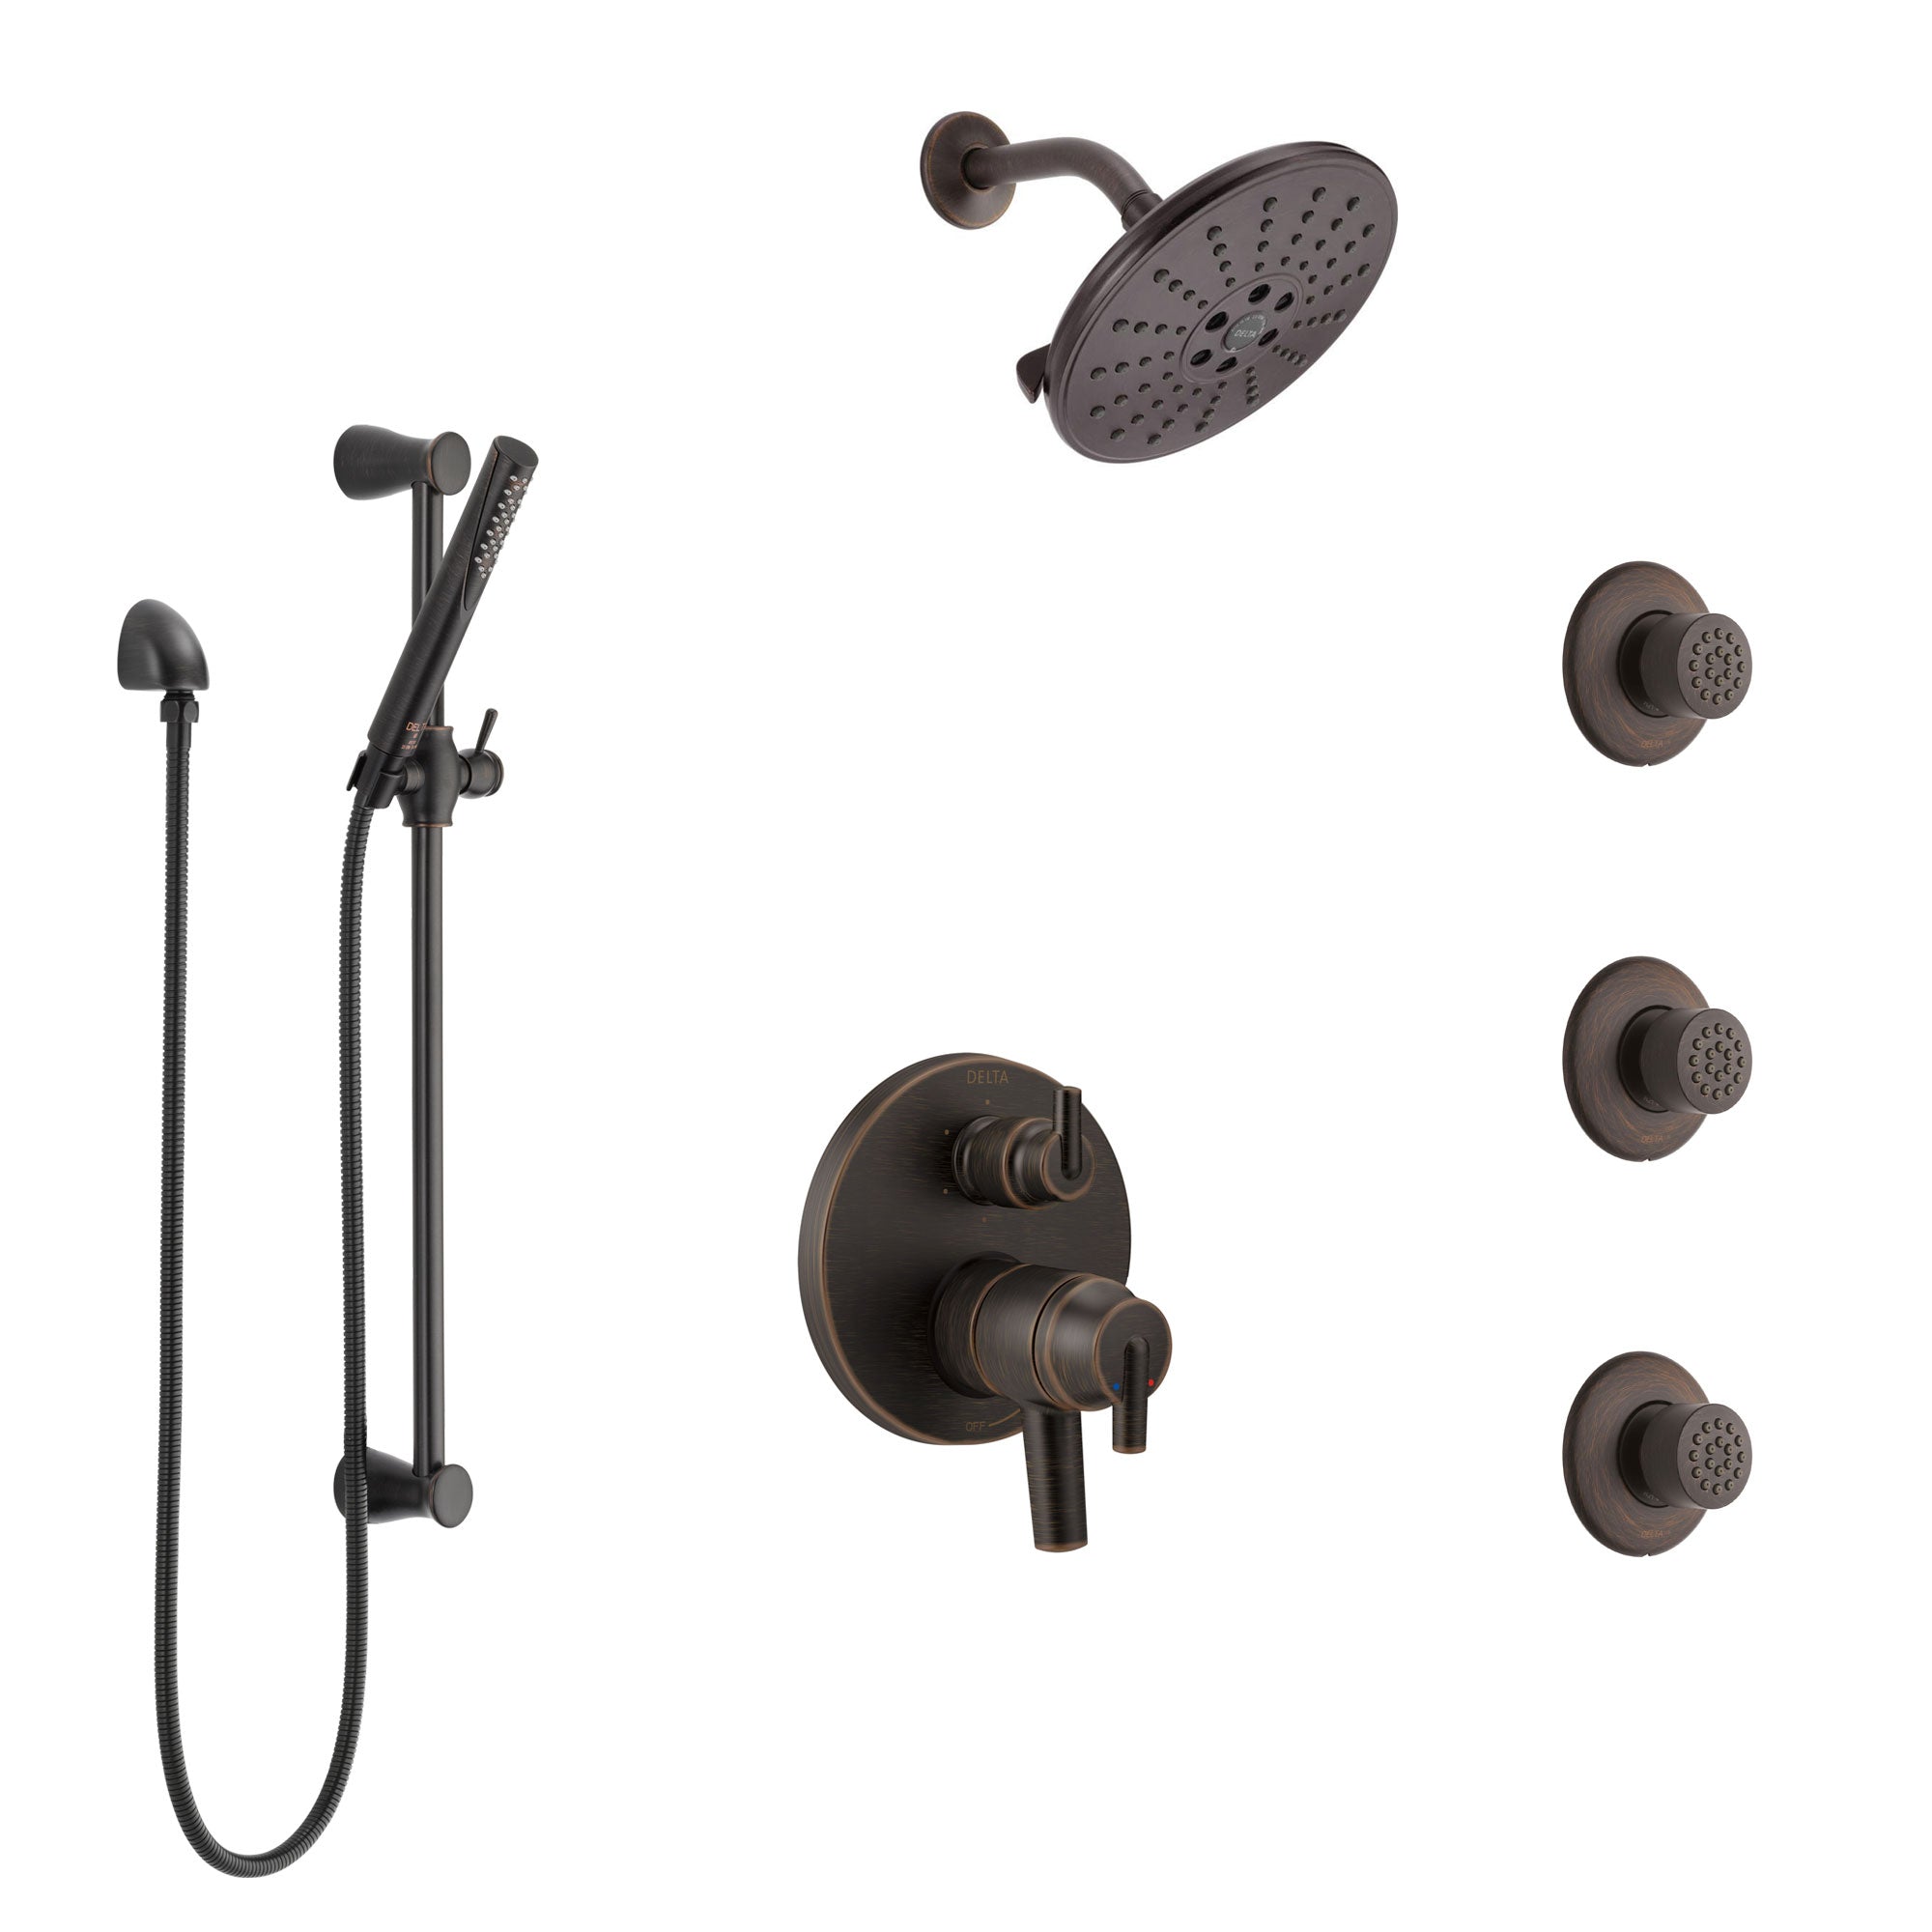 Delta Trinsic Venetian Bronze Shower System with Dual Control Handle, Integrated Diverter, Showerhead, 3 Body Sprays, and Hand Shower SS27959RB2